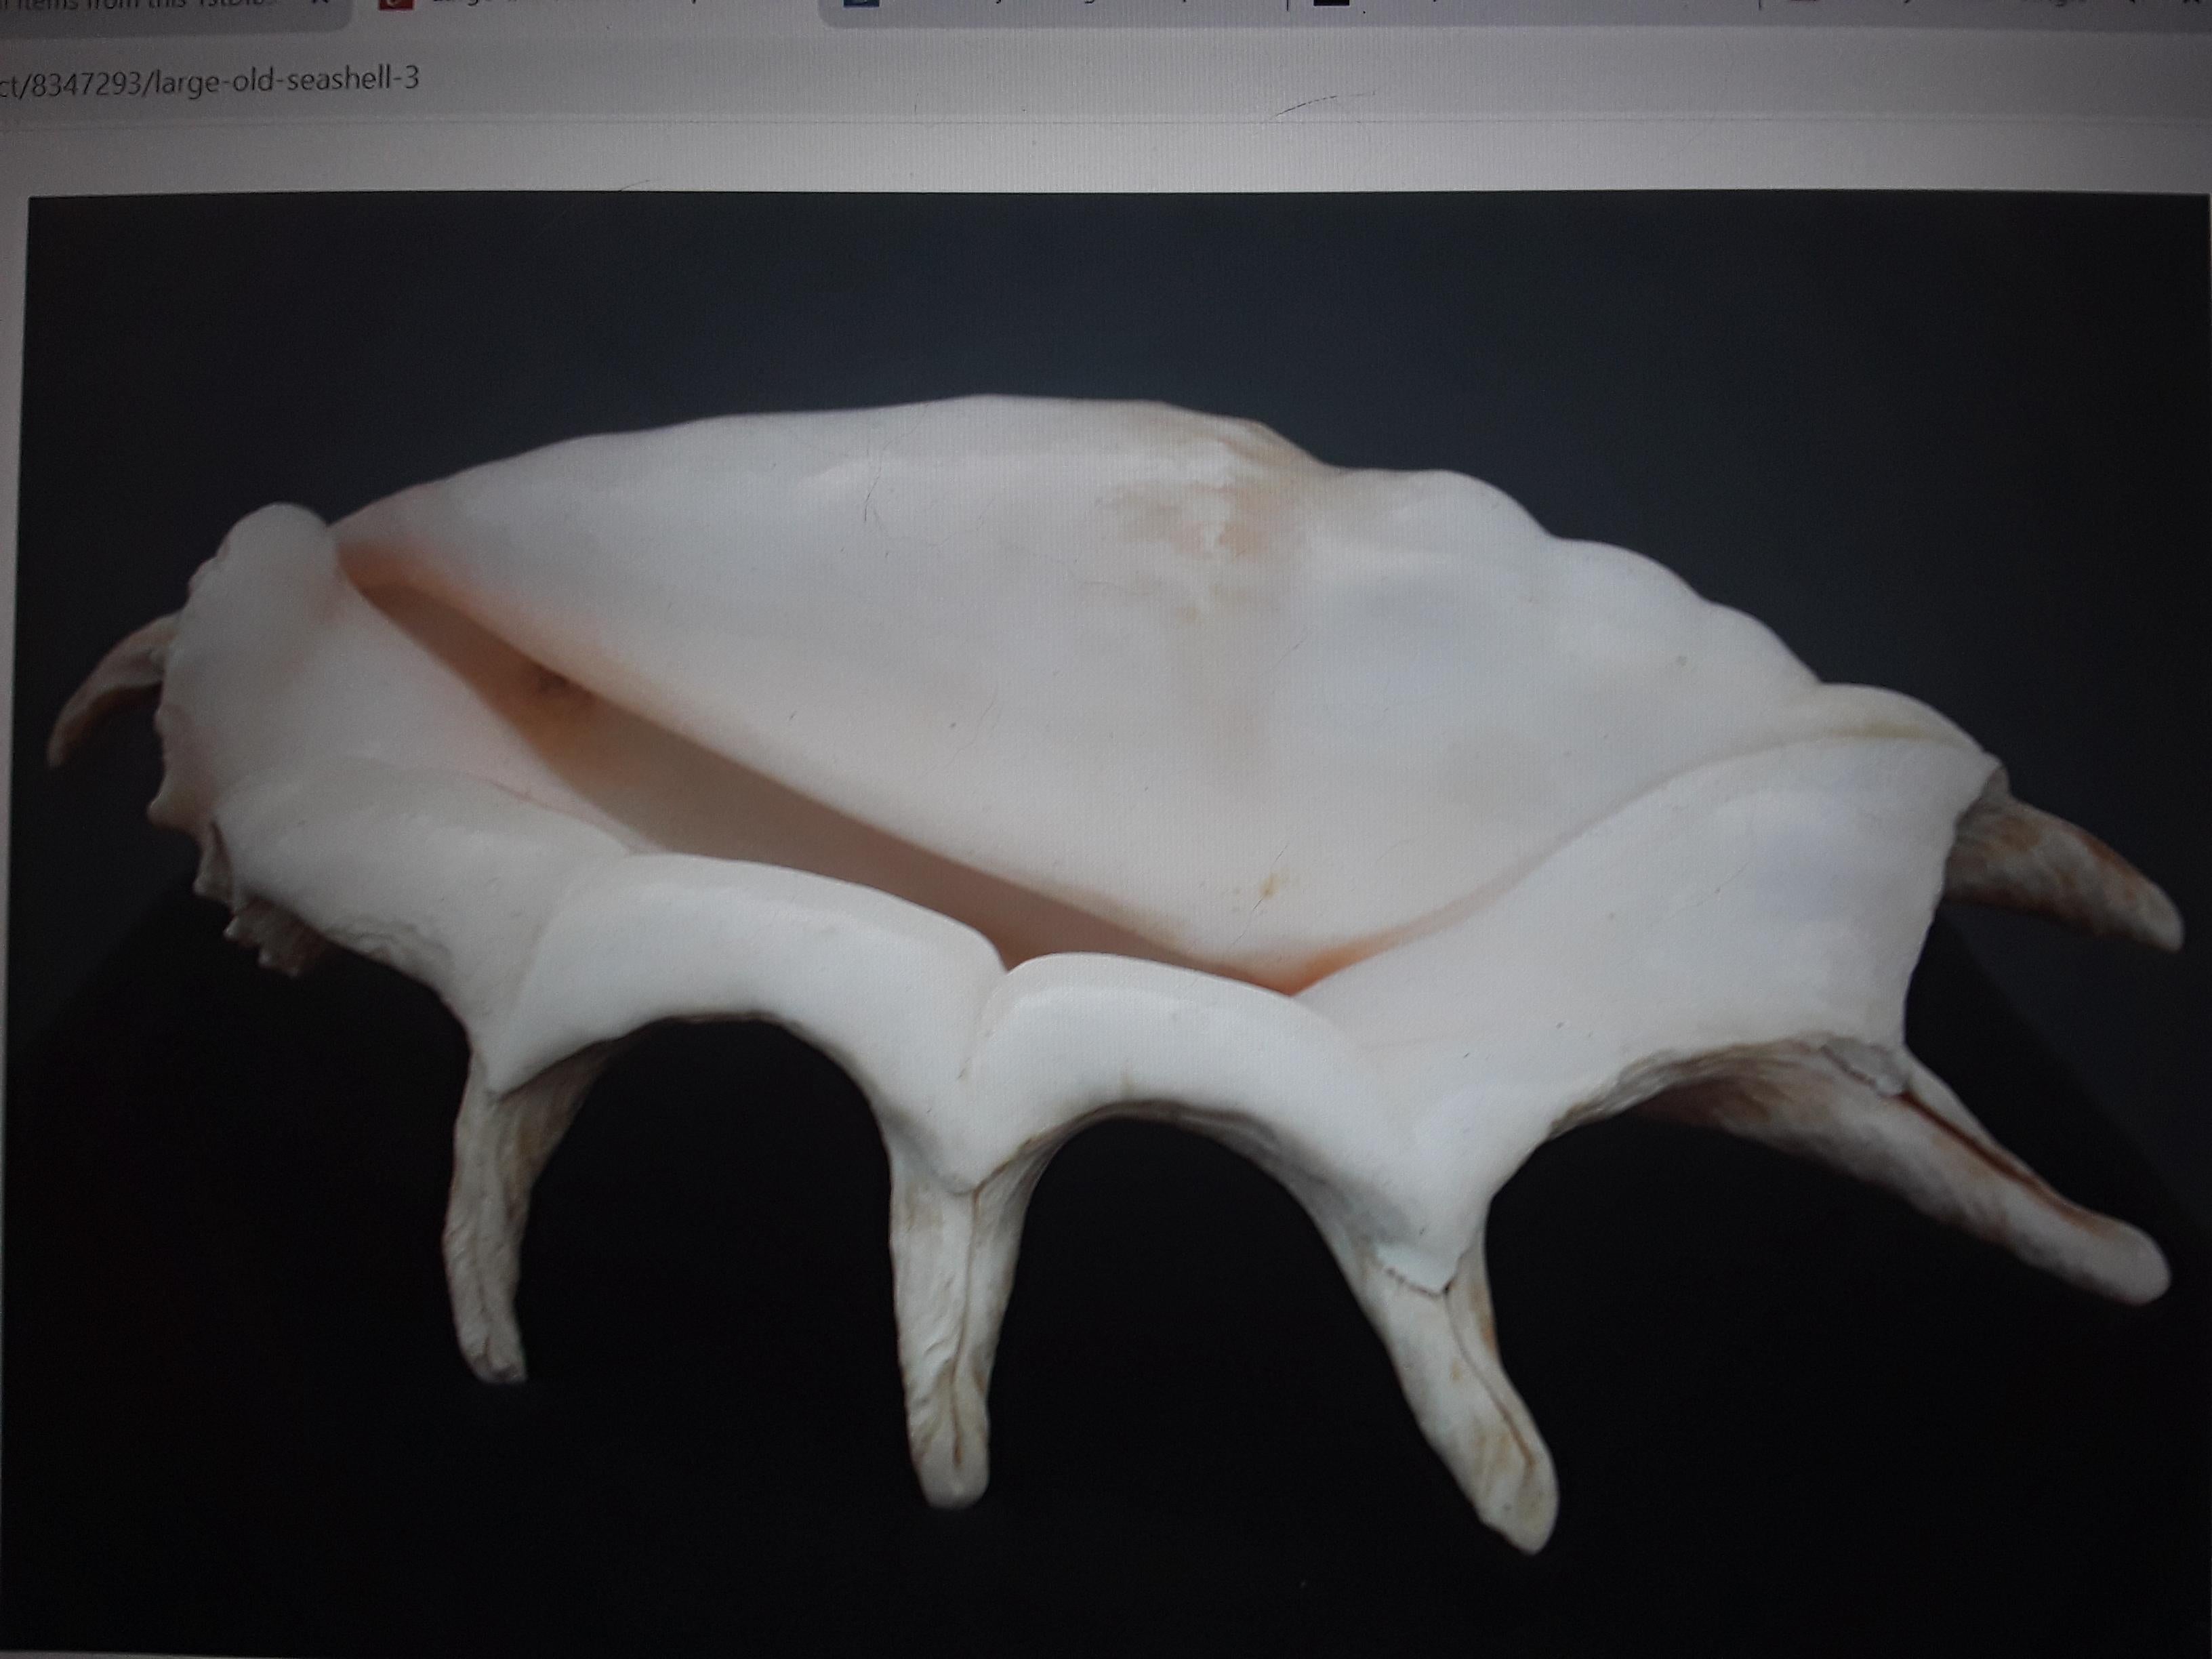 Large Highly Decorative Old Natural Sea Shell #4 In Good Condition For Sale In Opa Locka, FL